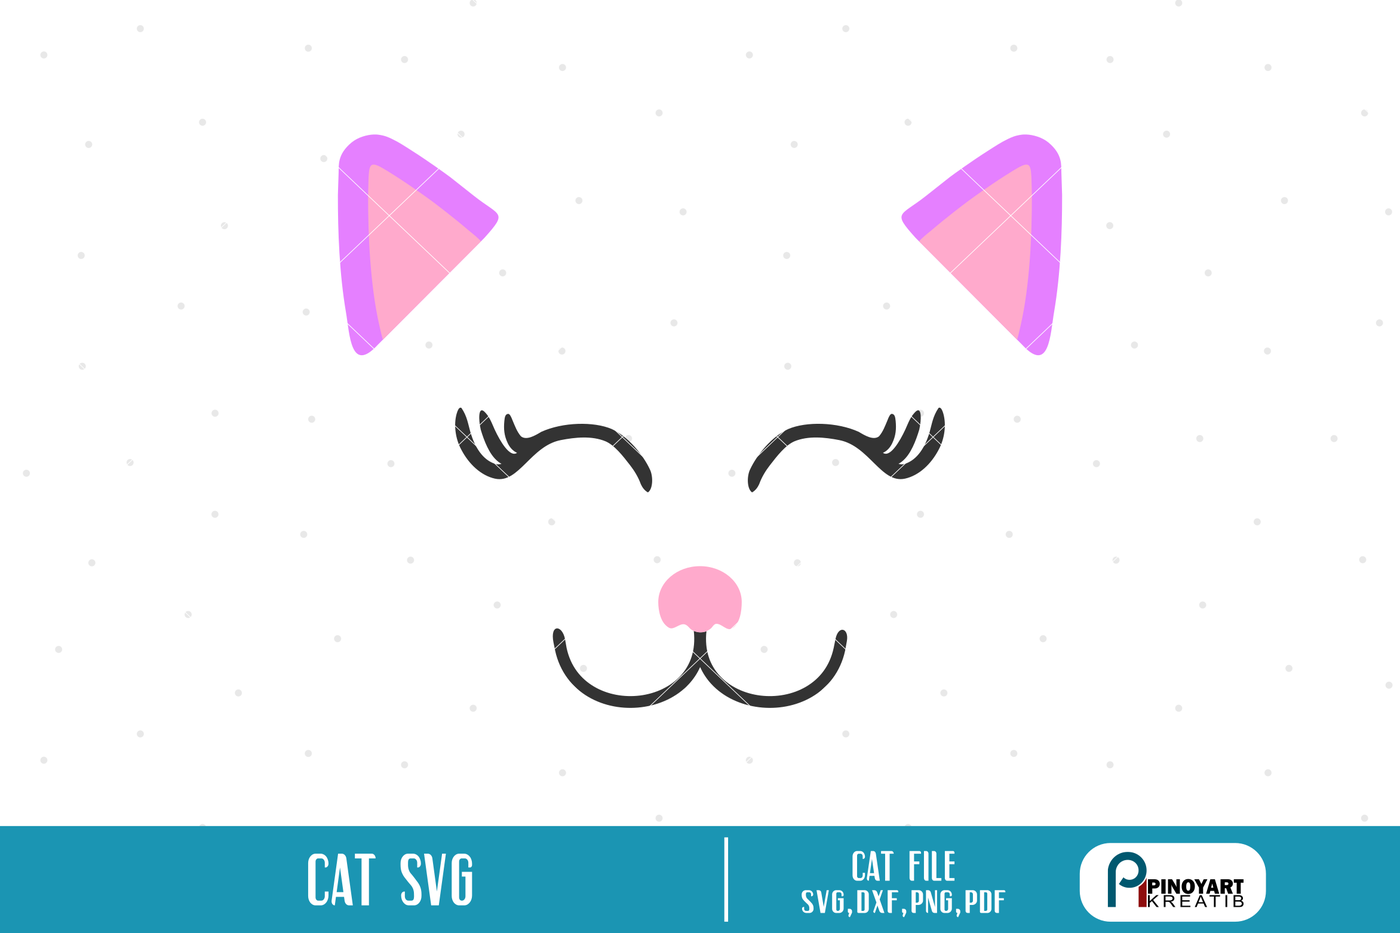 cat svg,cat svg file,cat svg,cat svg for cricut,cat svg for silhouette